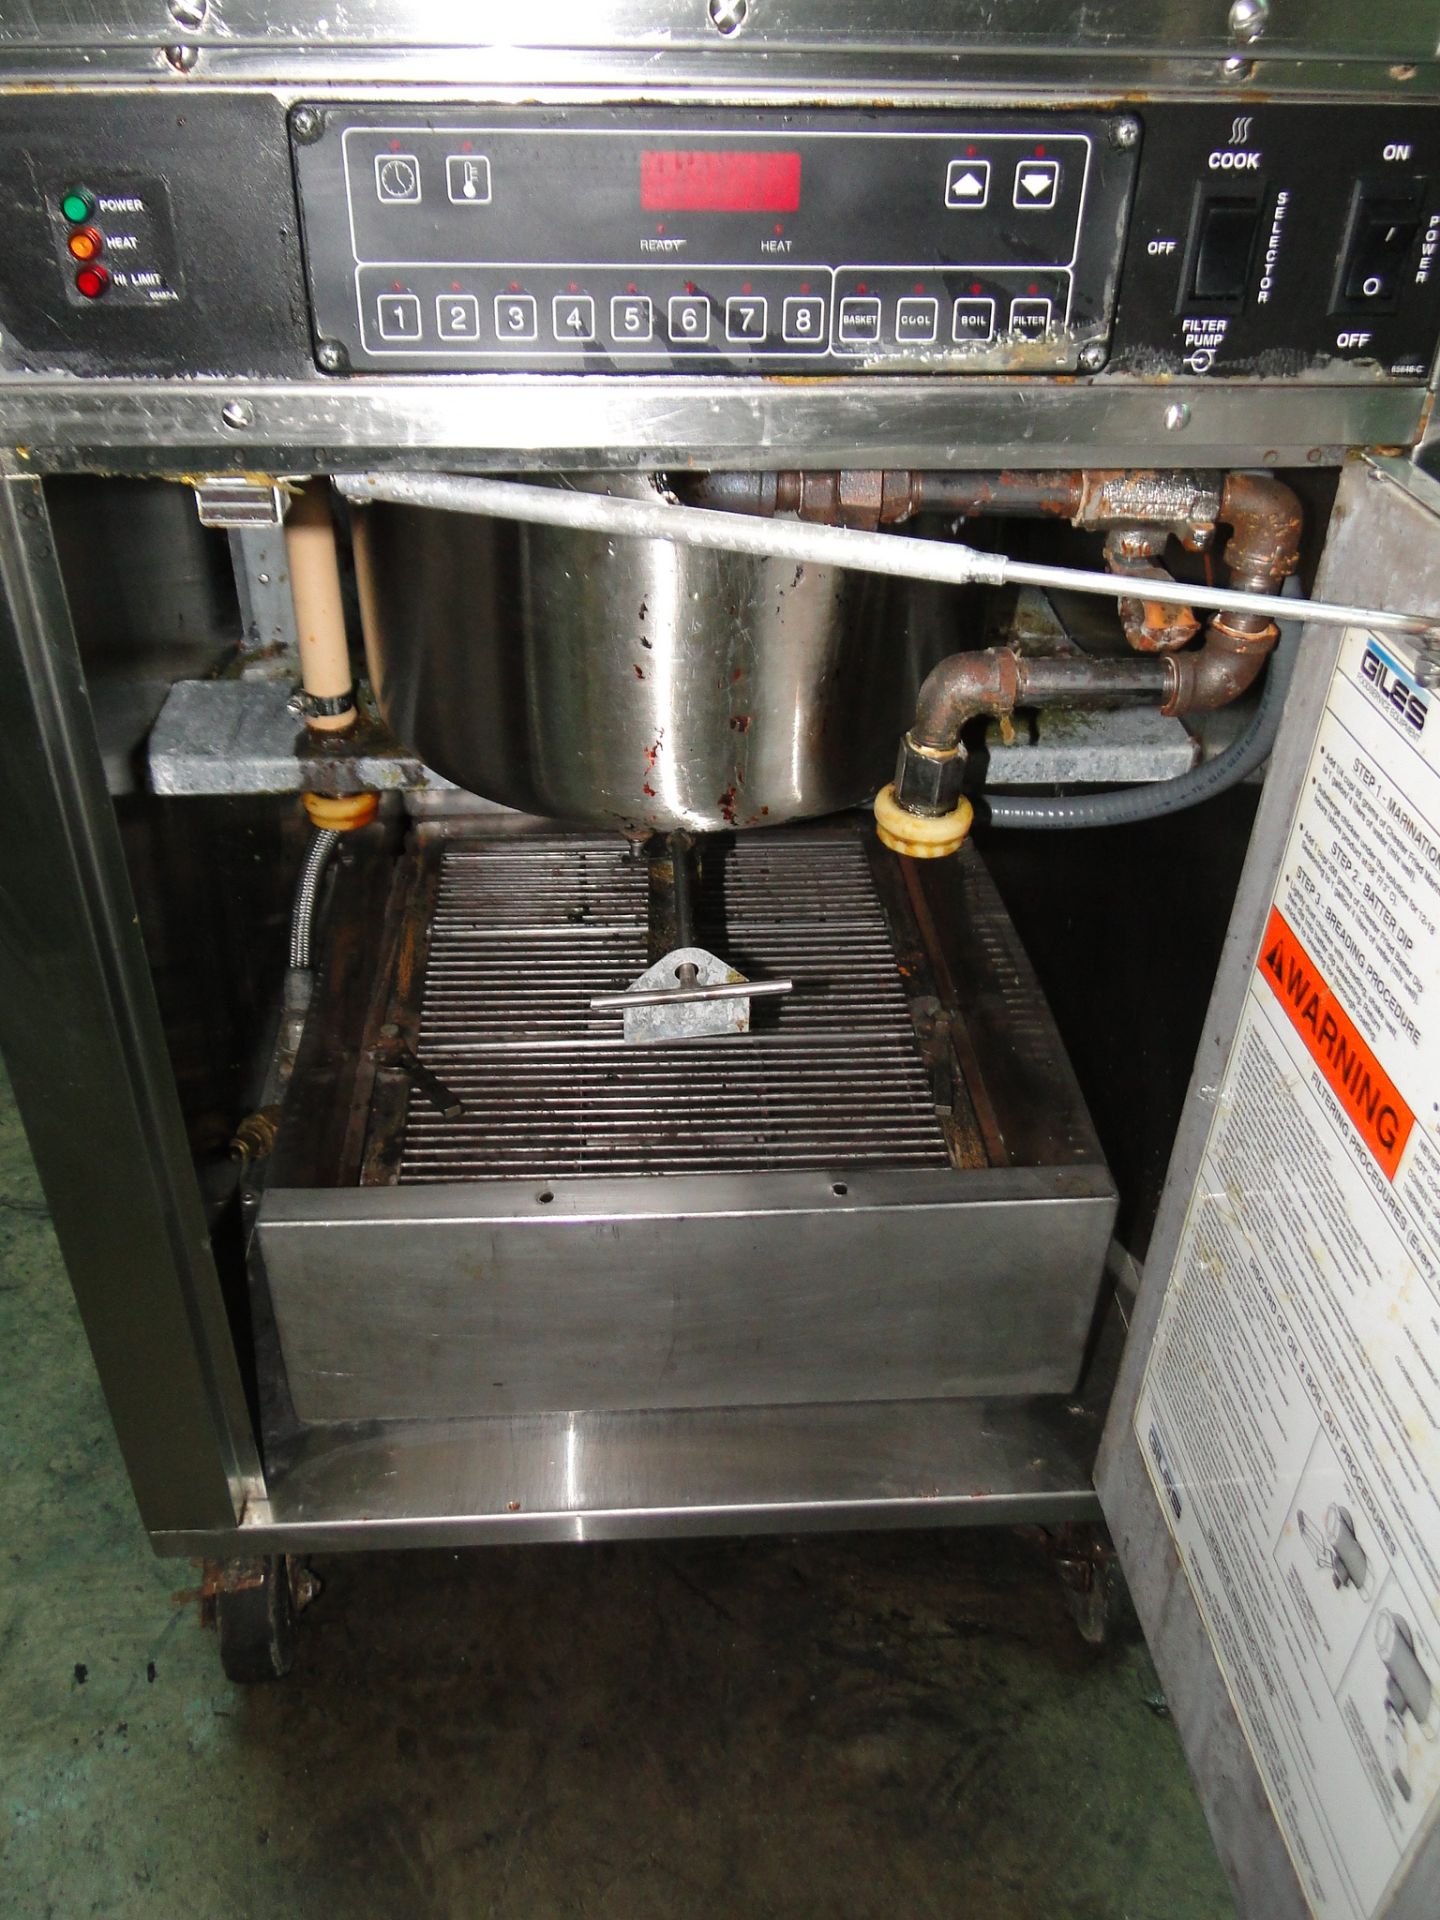 Giles "Chester Fried" Gas Fired Deep Fryer with Auto Lift, Model CF4006, S/N: A410140206, Equipped - Image 2 of 4